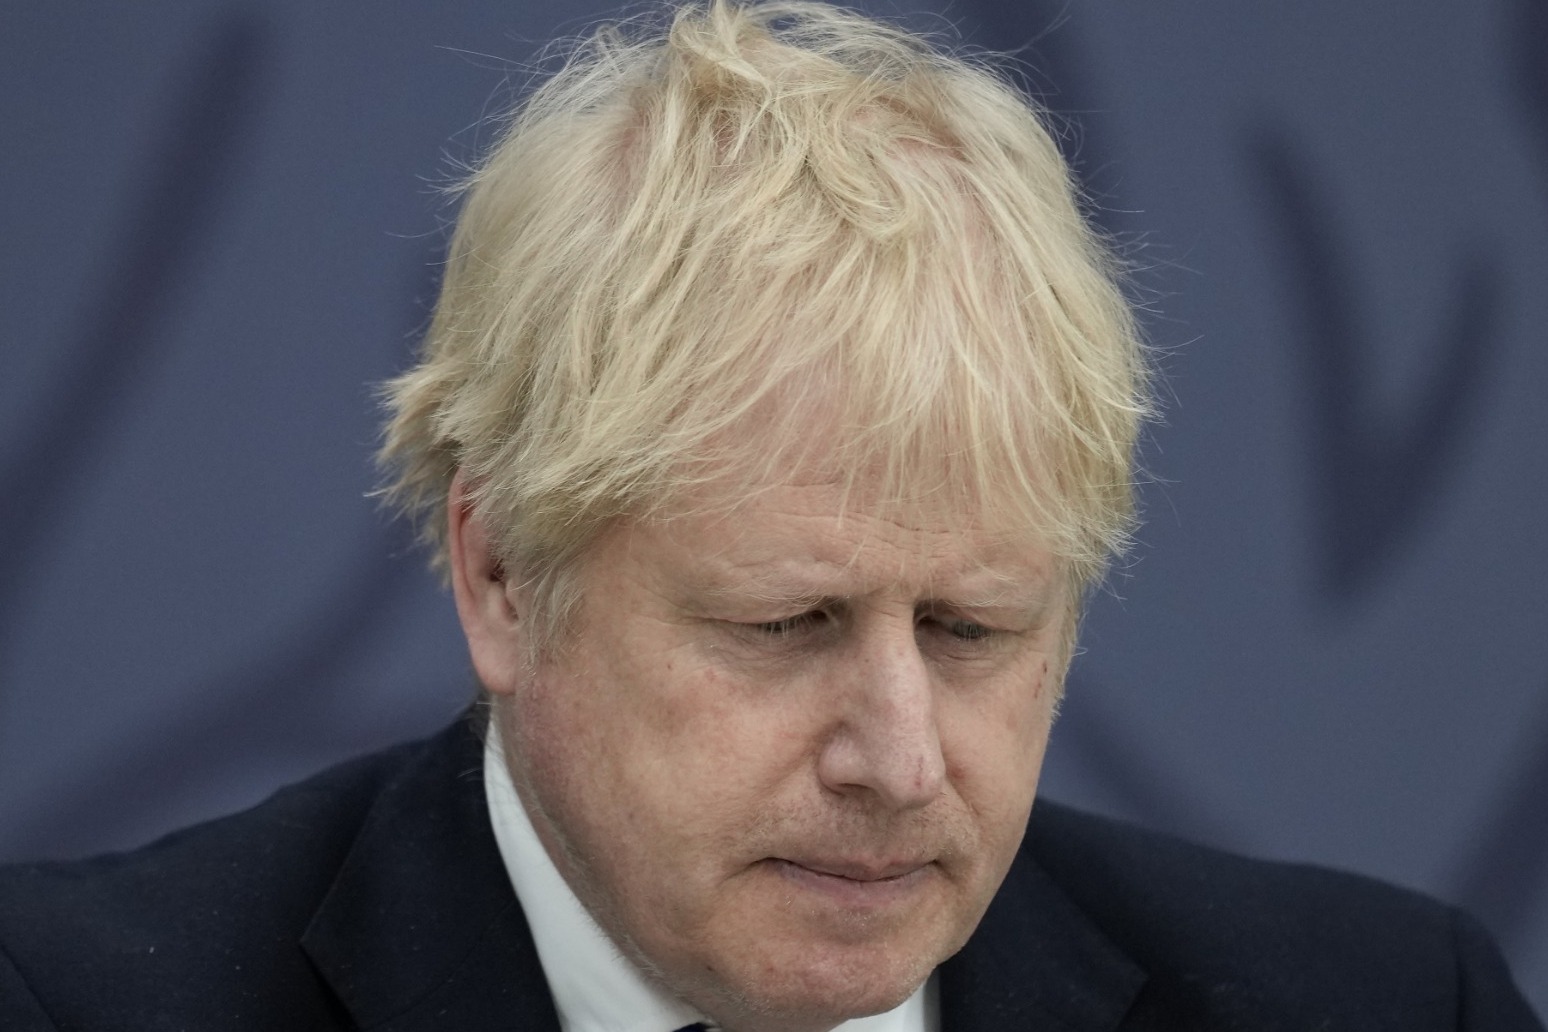 MPs to vote on whether Boris Johnson misled Parliament over partygate 